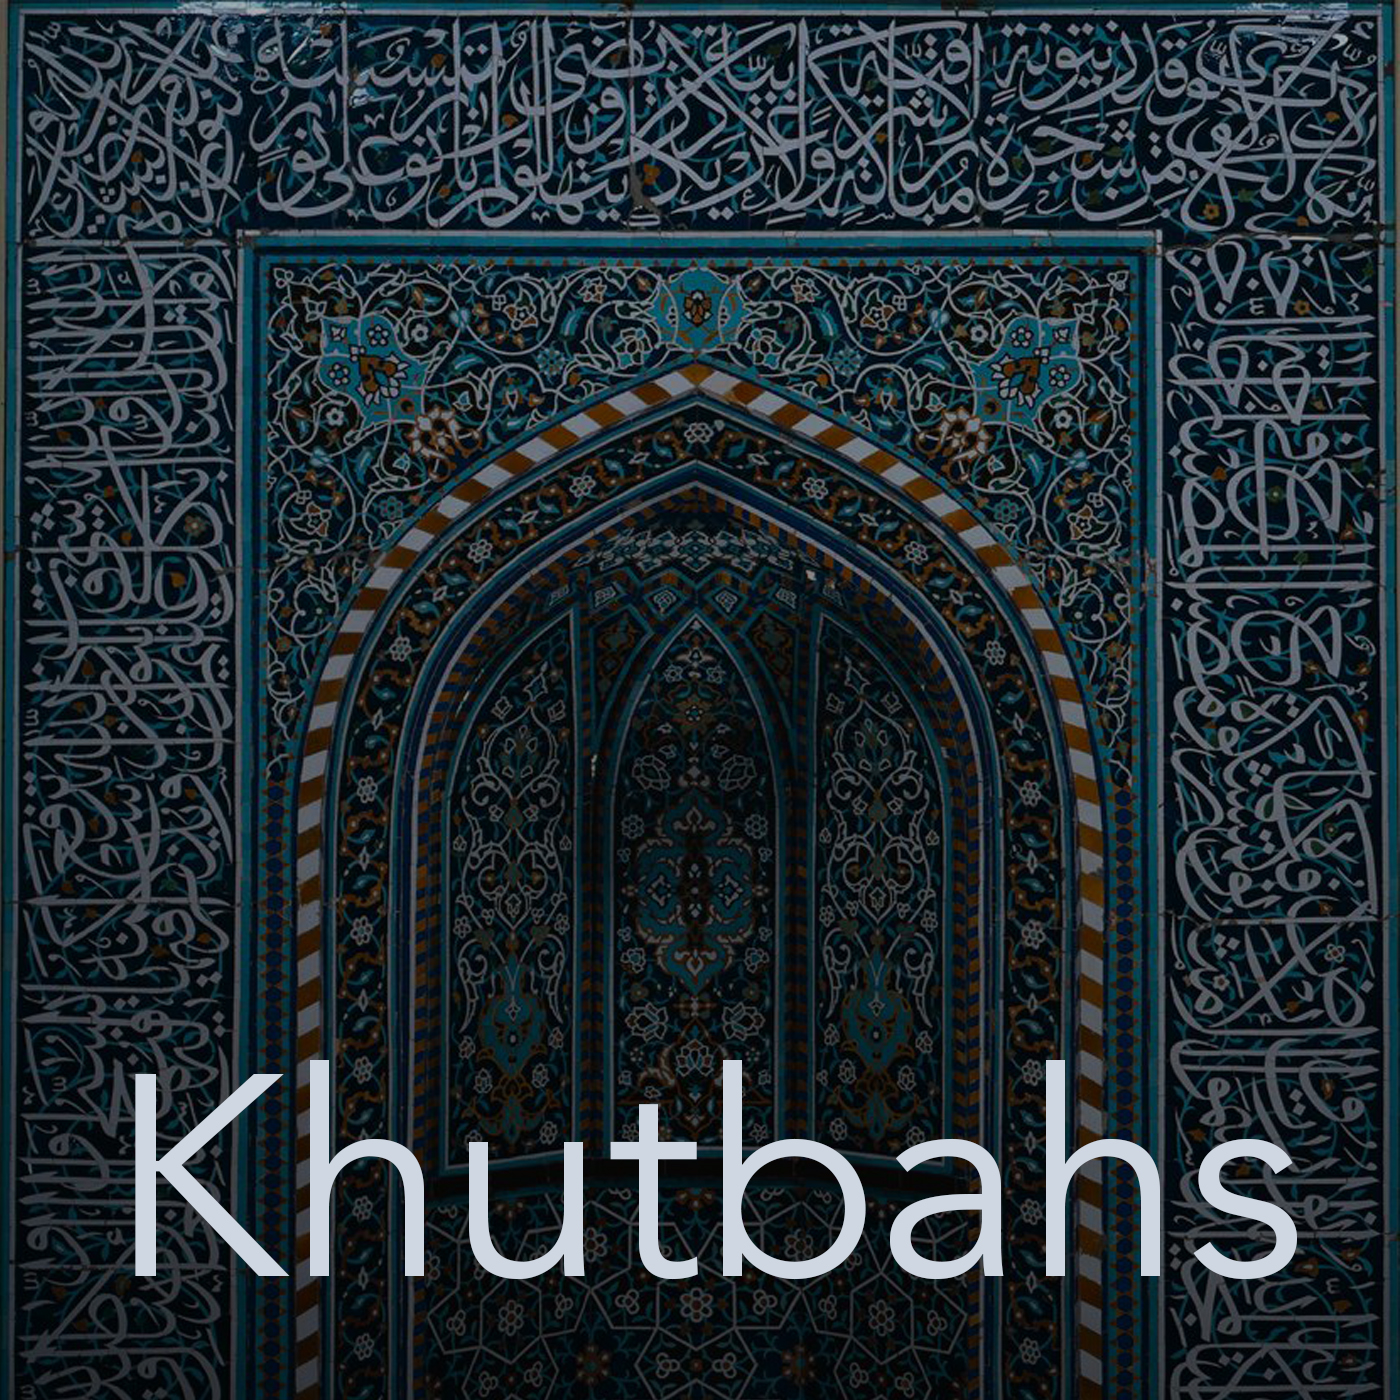 Khutbah: The Honor of Those Tested: A Reflection on Ghaza